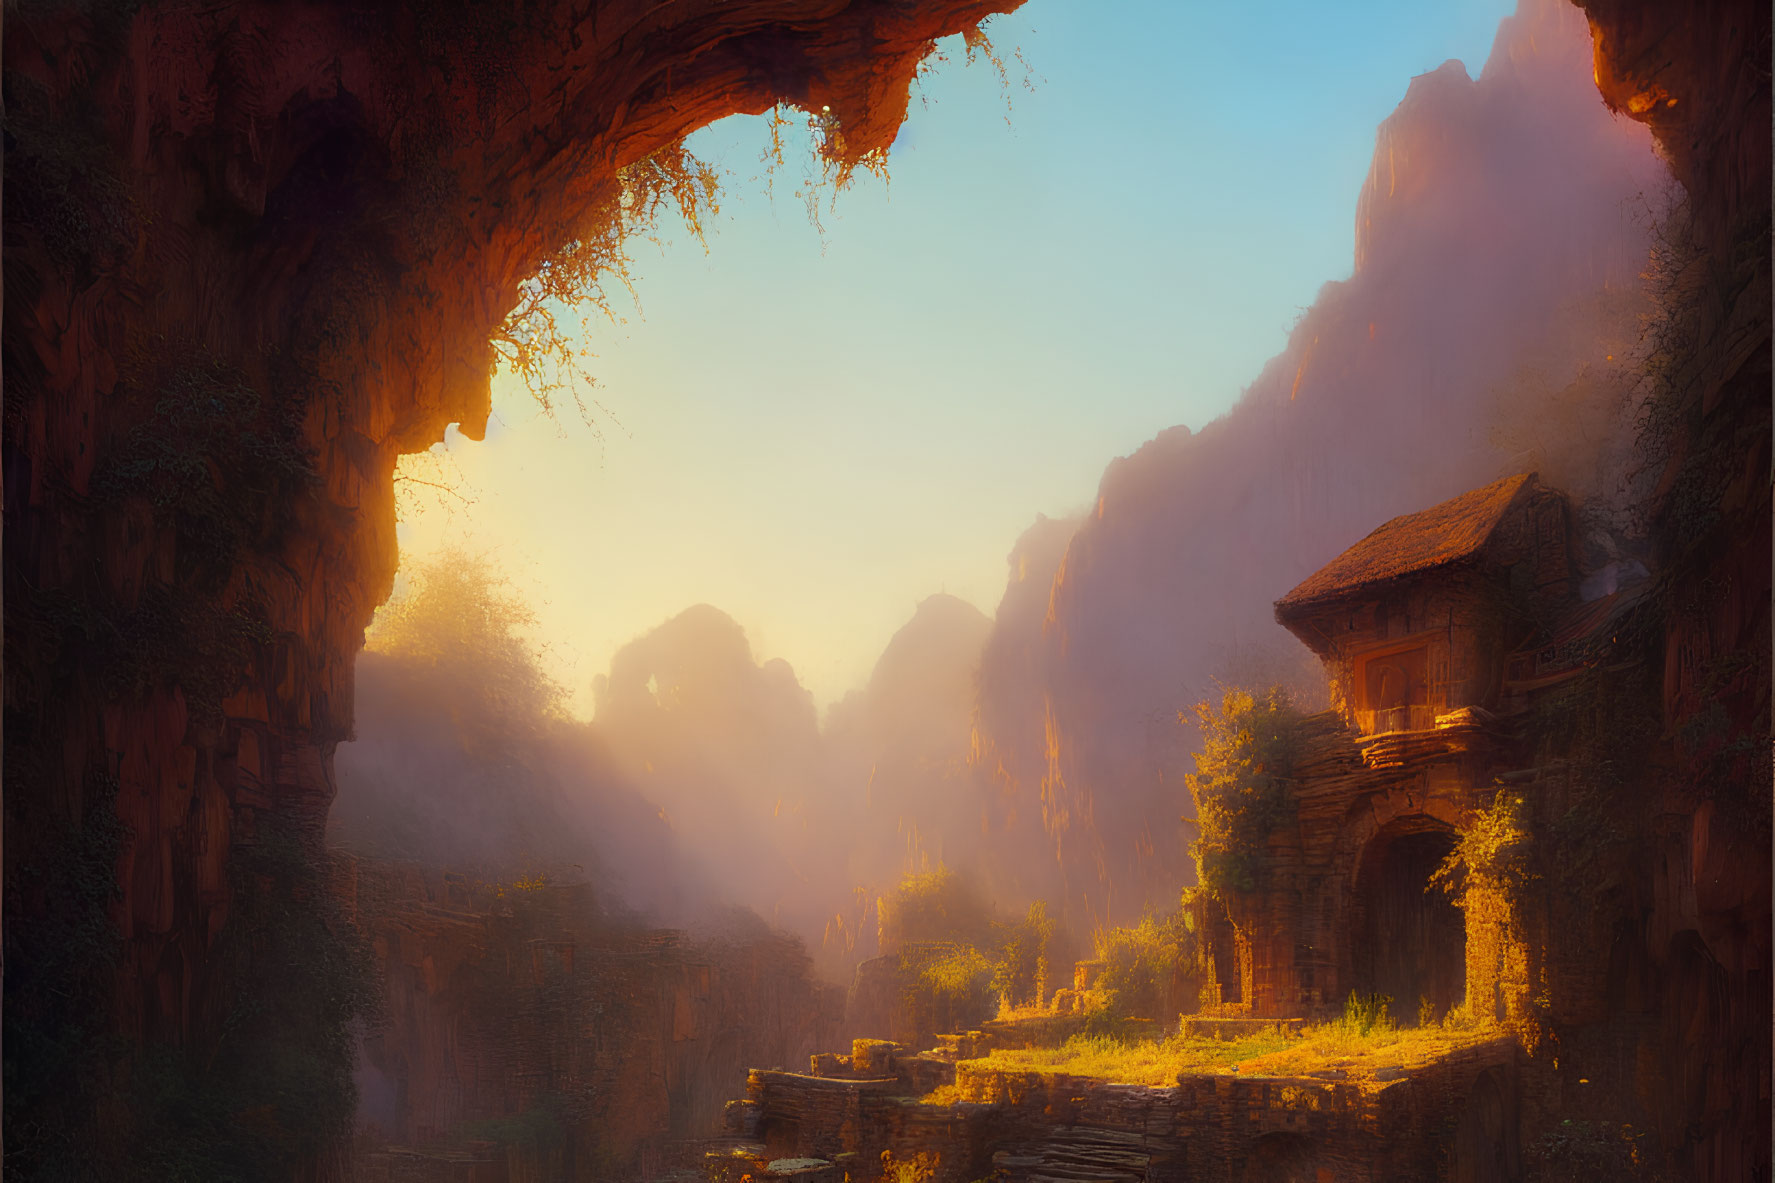 Sunlit Valley with Ancient Ruins and Solitary House Amid Cliffs